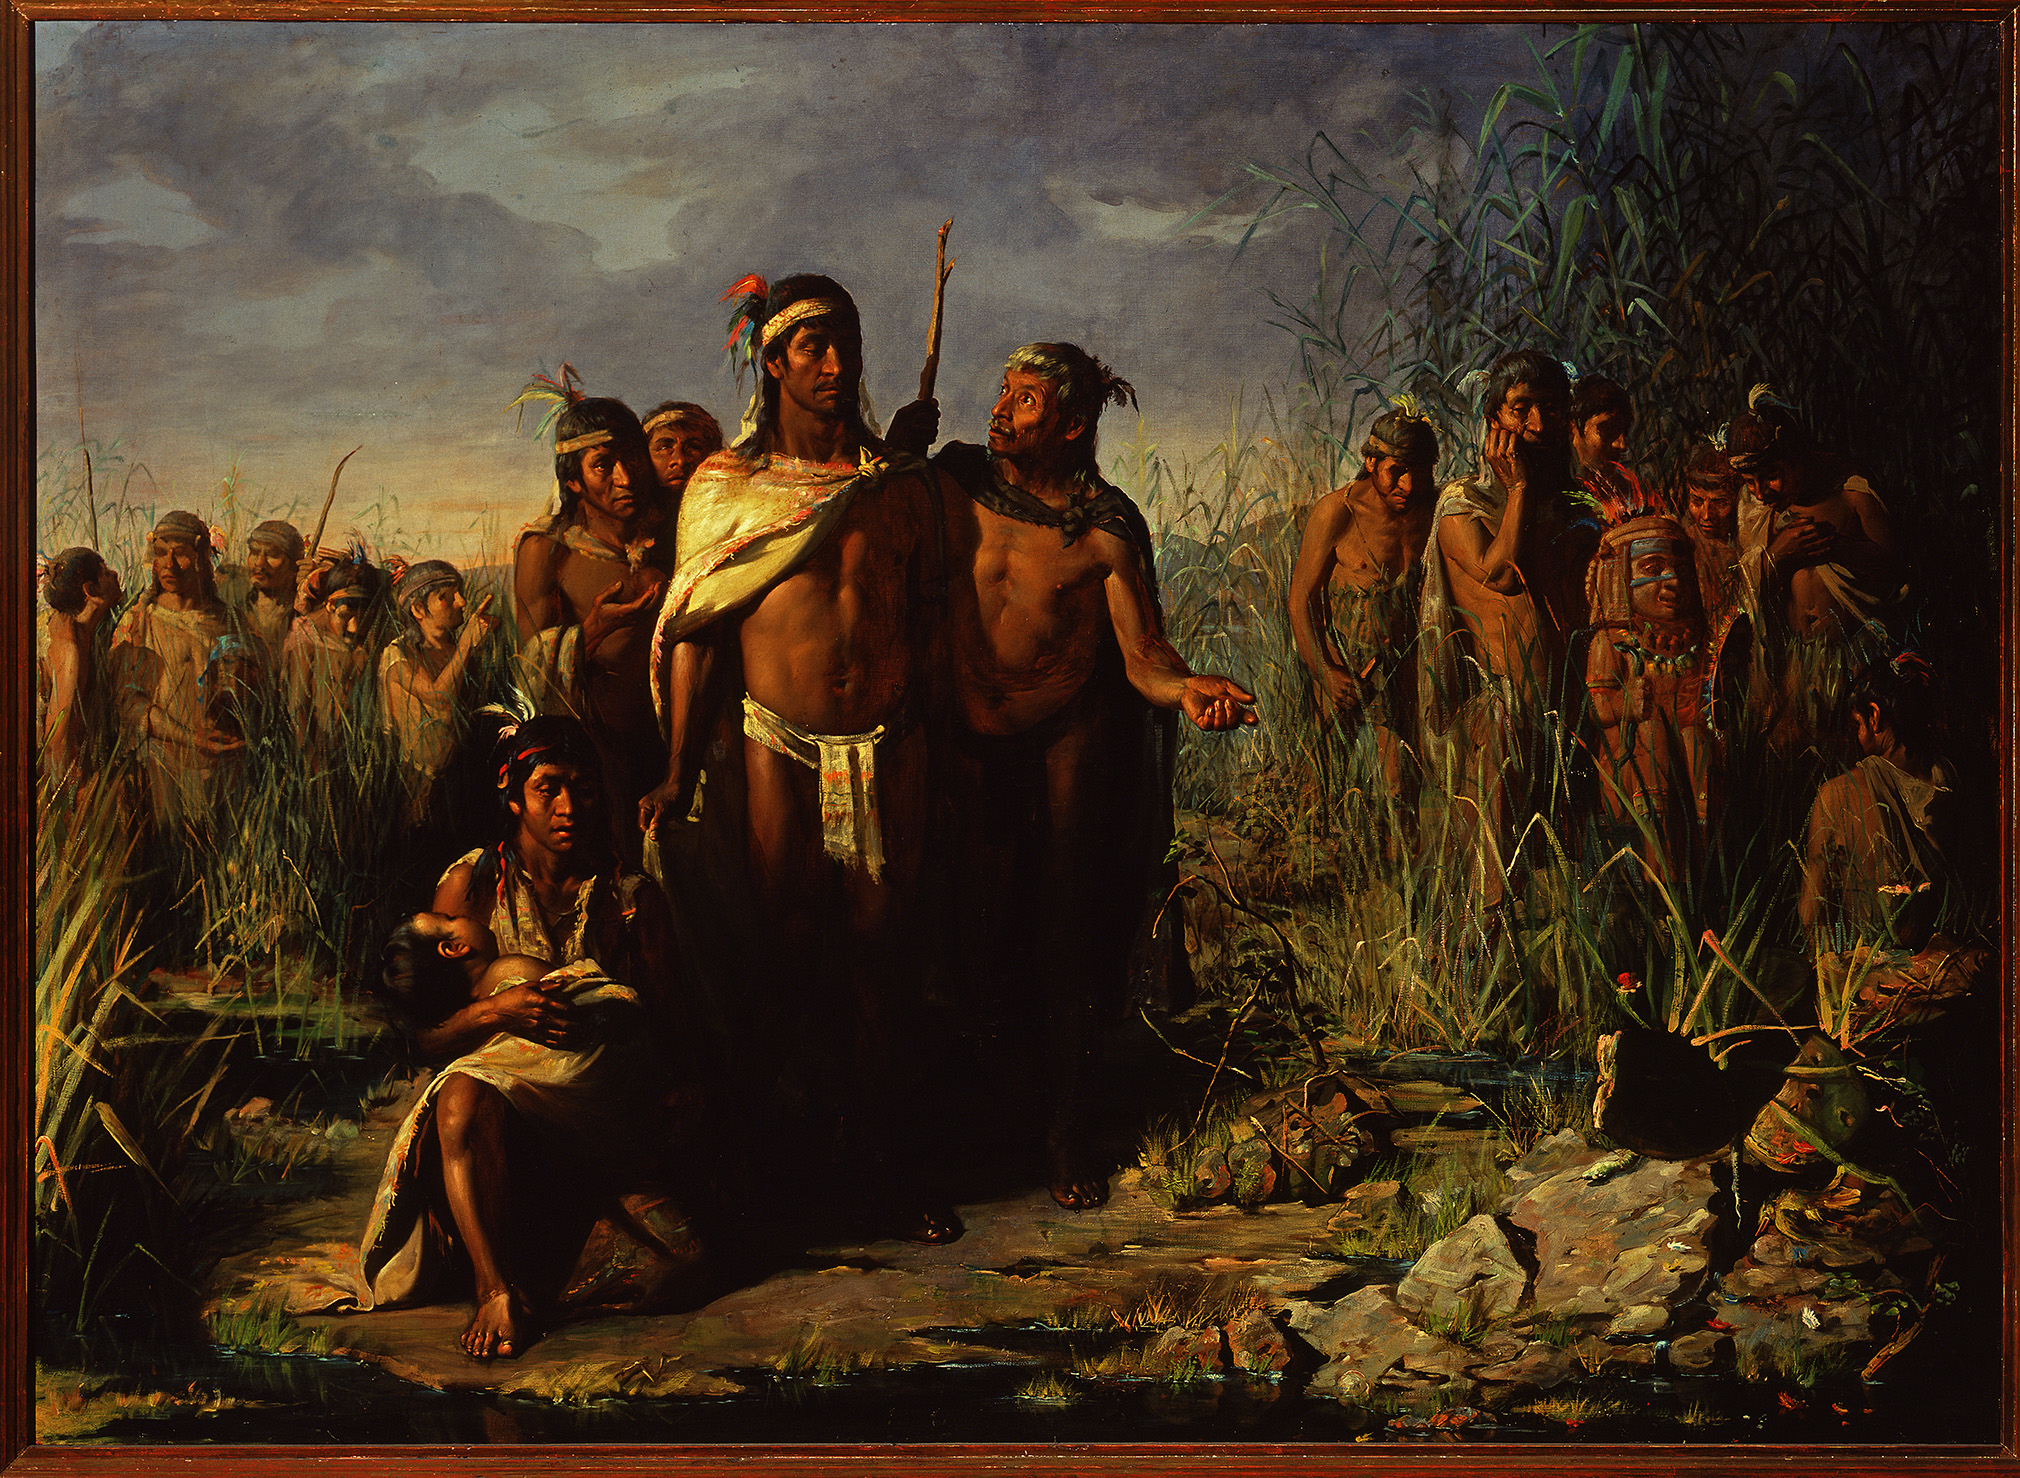 Indigenous people wearing loincloths, headbands, and feathers are assembled outdoors in an area with tall grass, corn, and rocks.